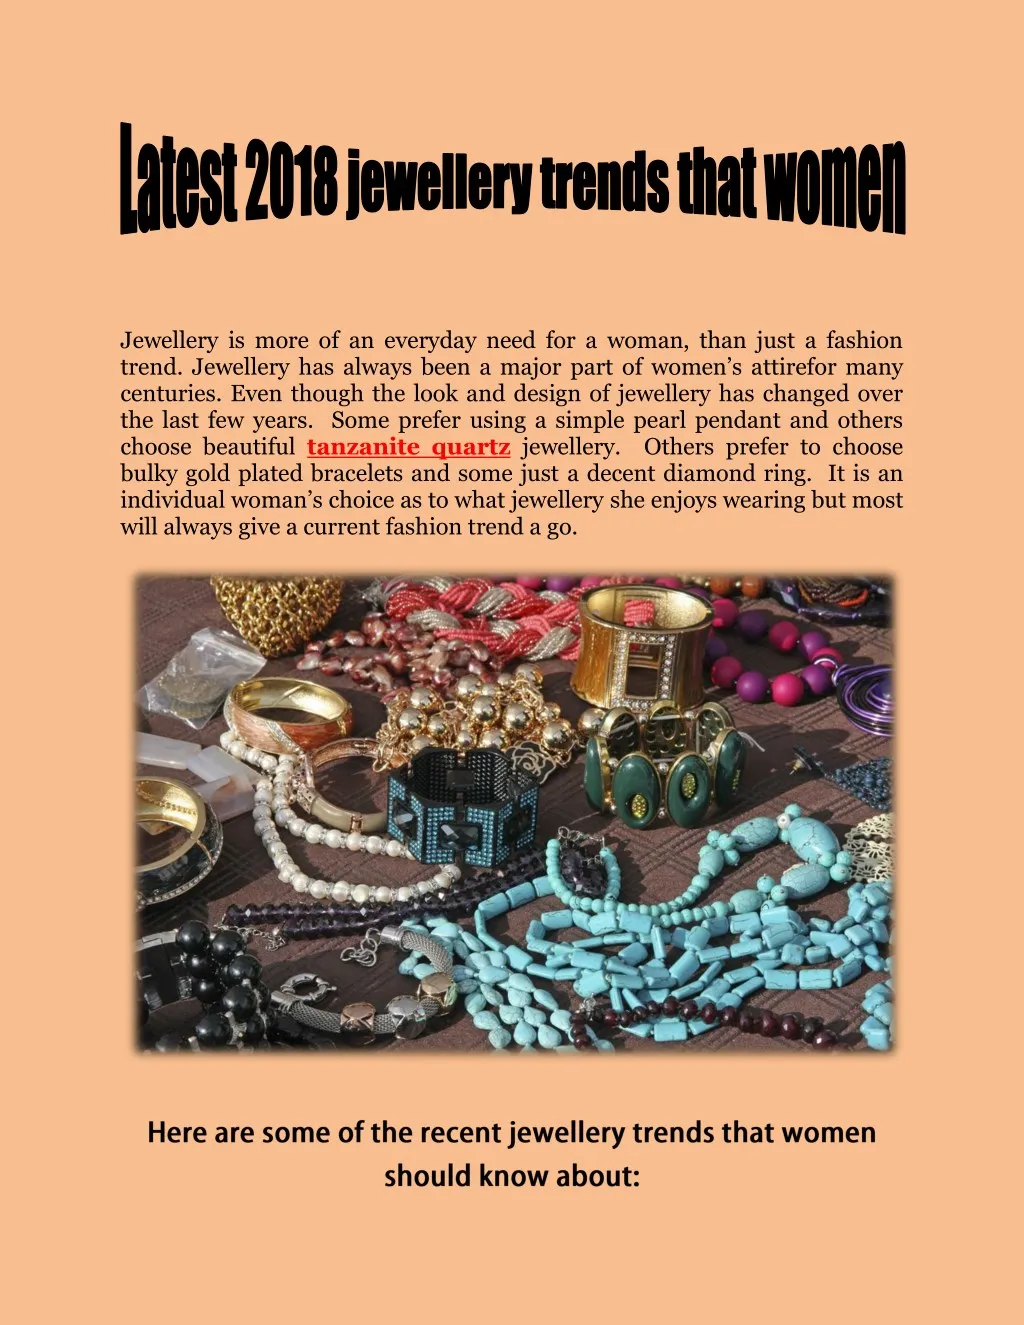 jewellery is more of an everyday need for a woman